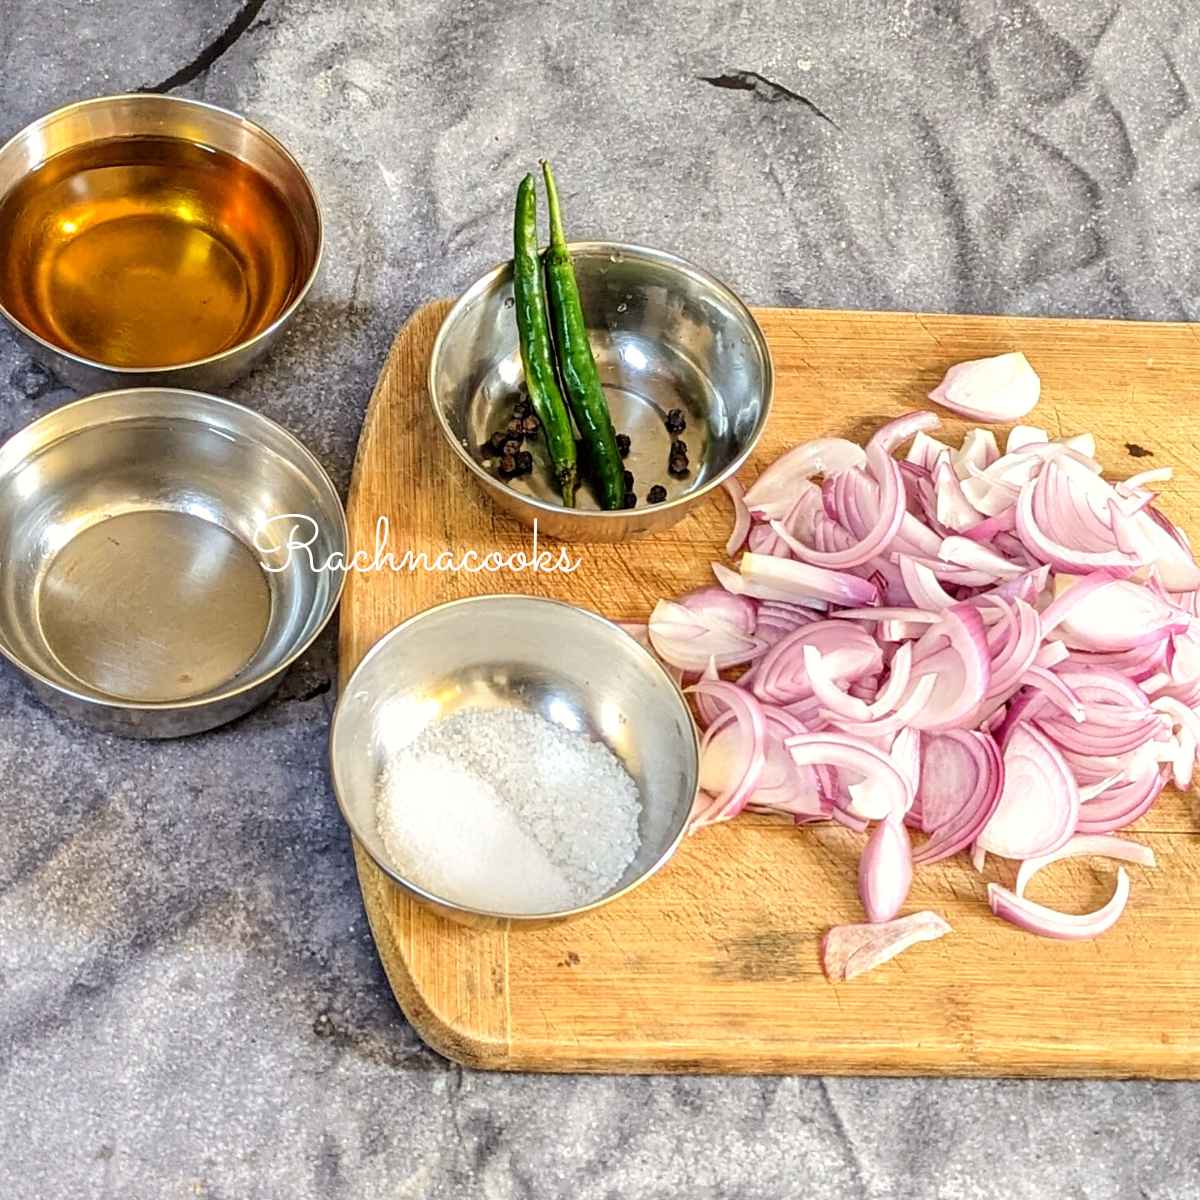 Ingredients for pickled onions: Sliced onion, slit chillies, peppercorns, salt, sugar, water and apple cider vinegar.